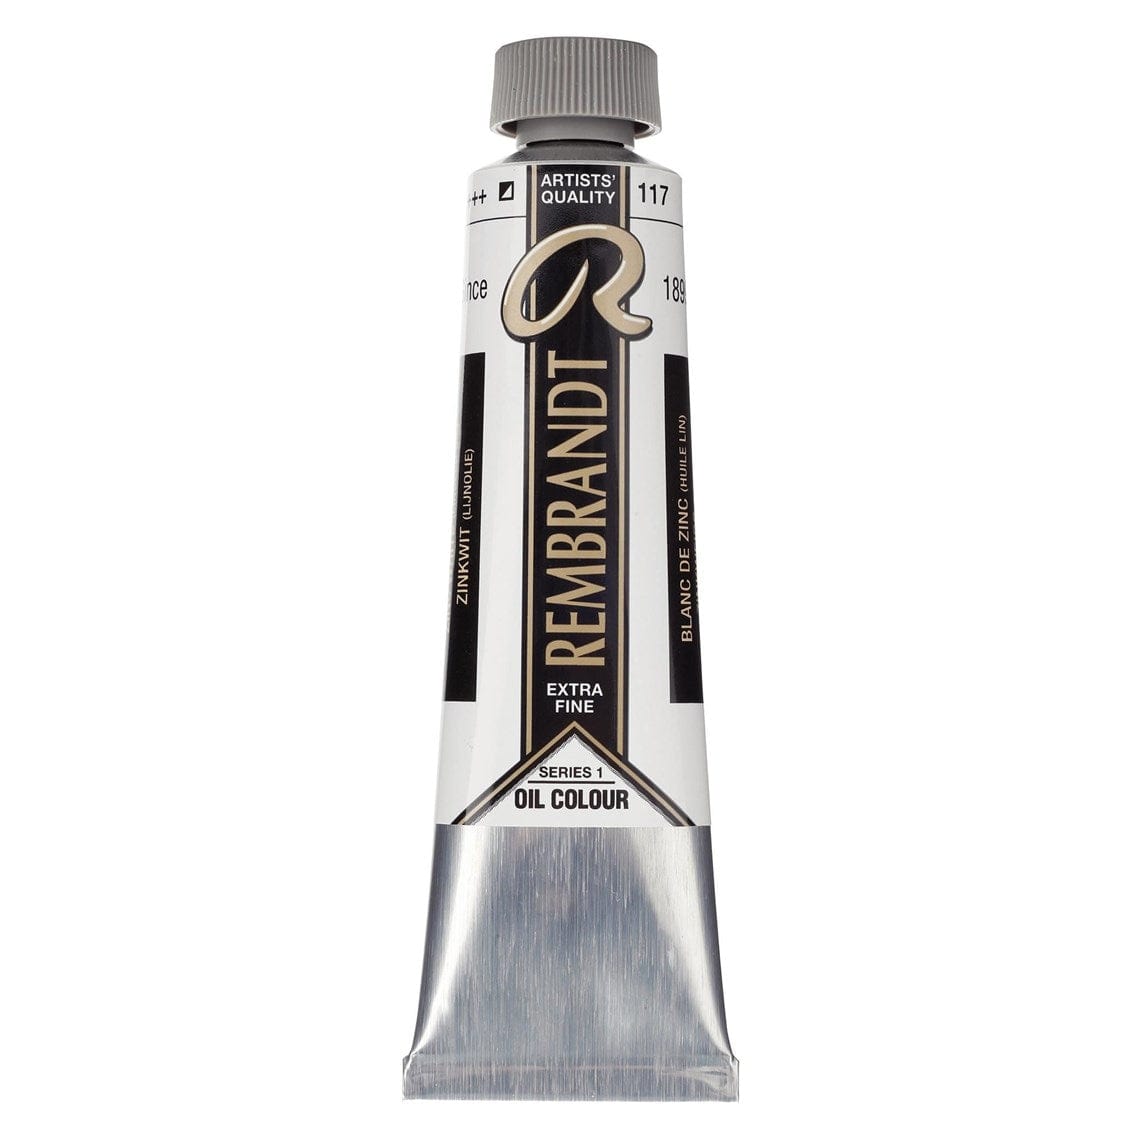 Rembrandt Oliemaling 40ml Zinc White (Linseed oil)